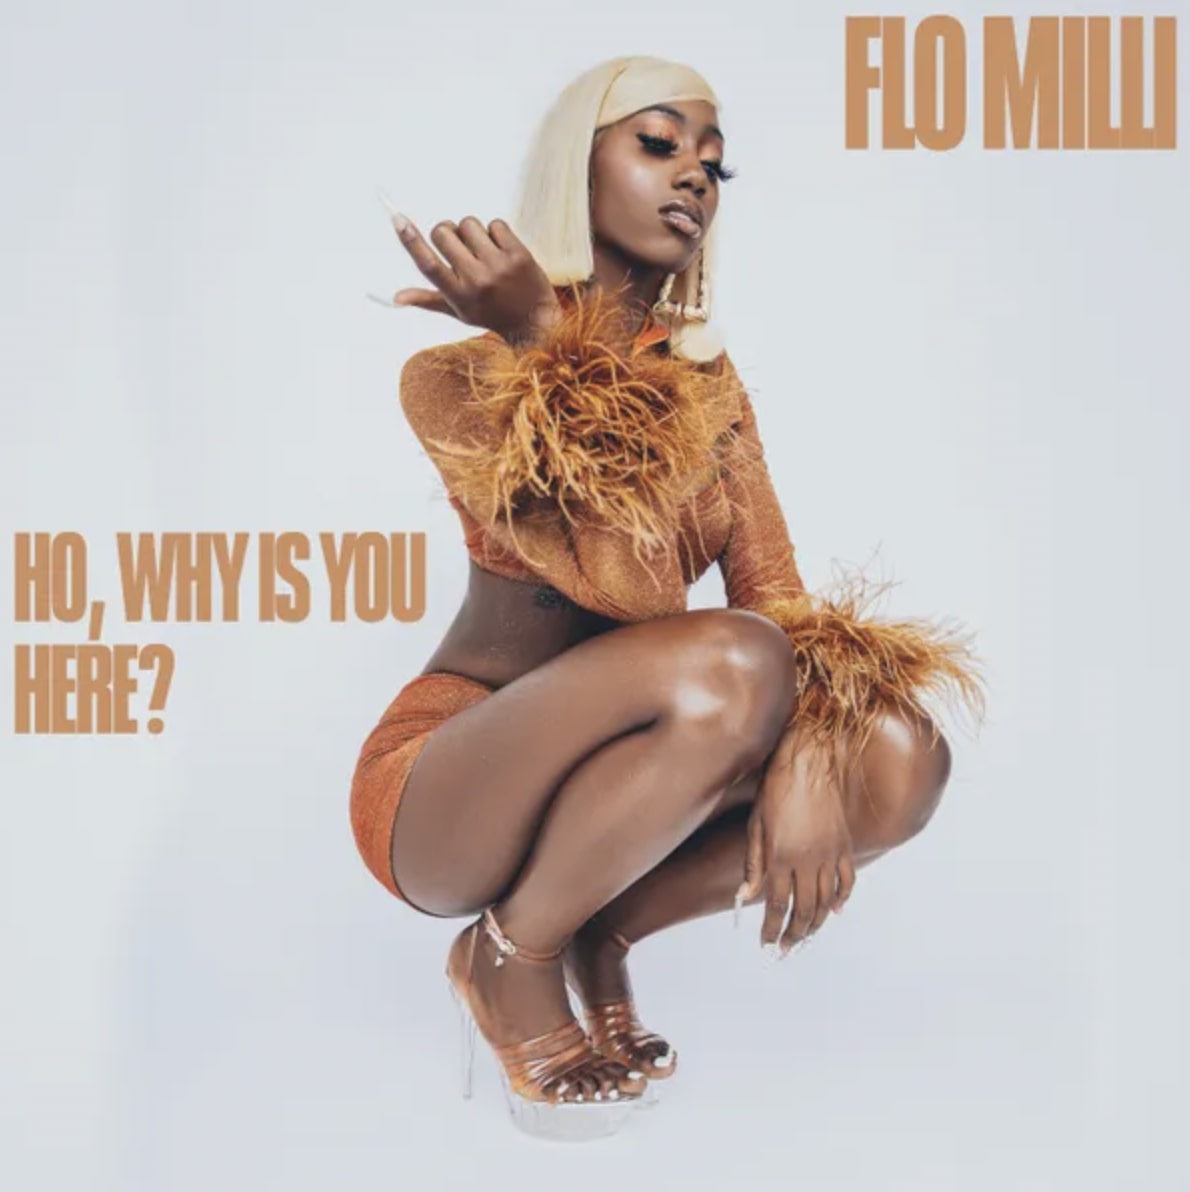 Flo Milli’s “Ho, why is you here ?” Turns Three: Stream “Not Friendly” To Celebrate